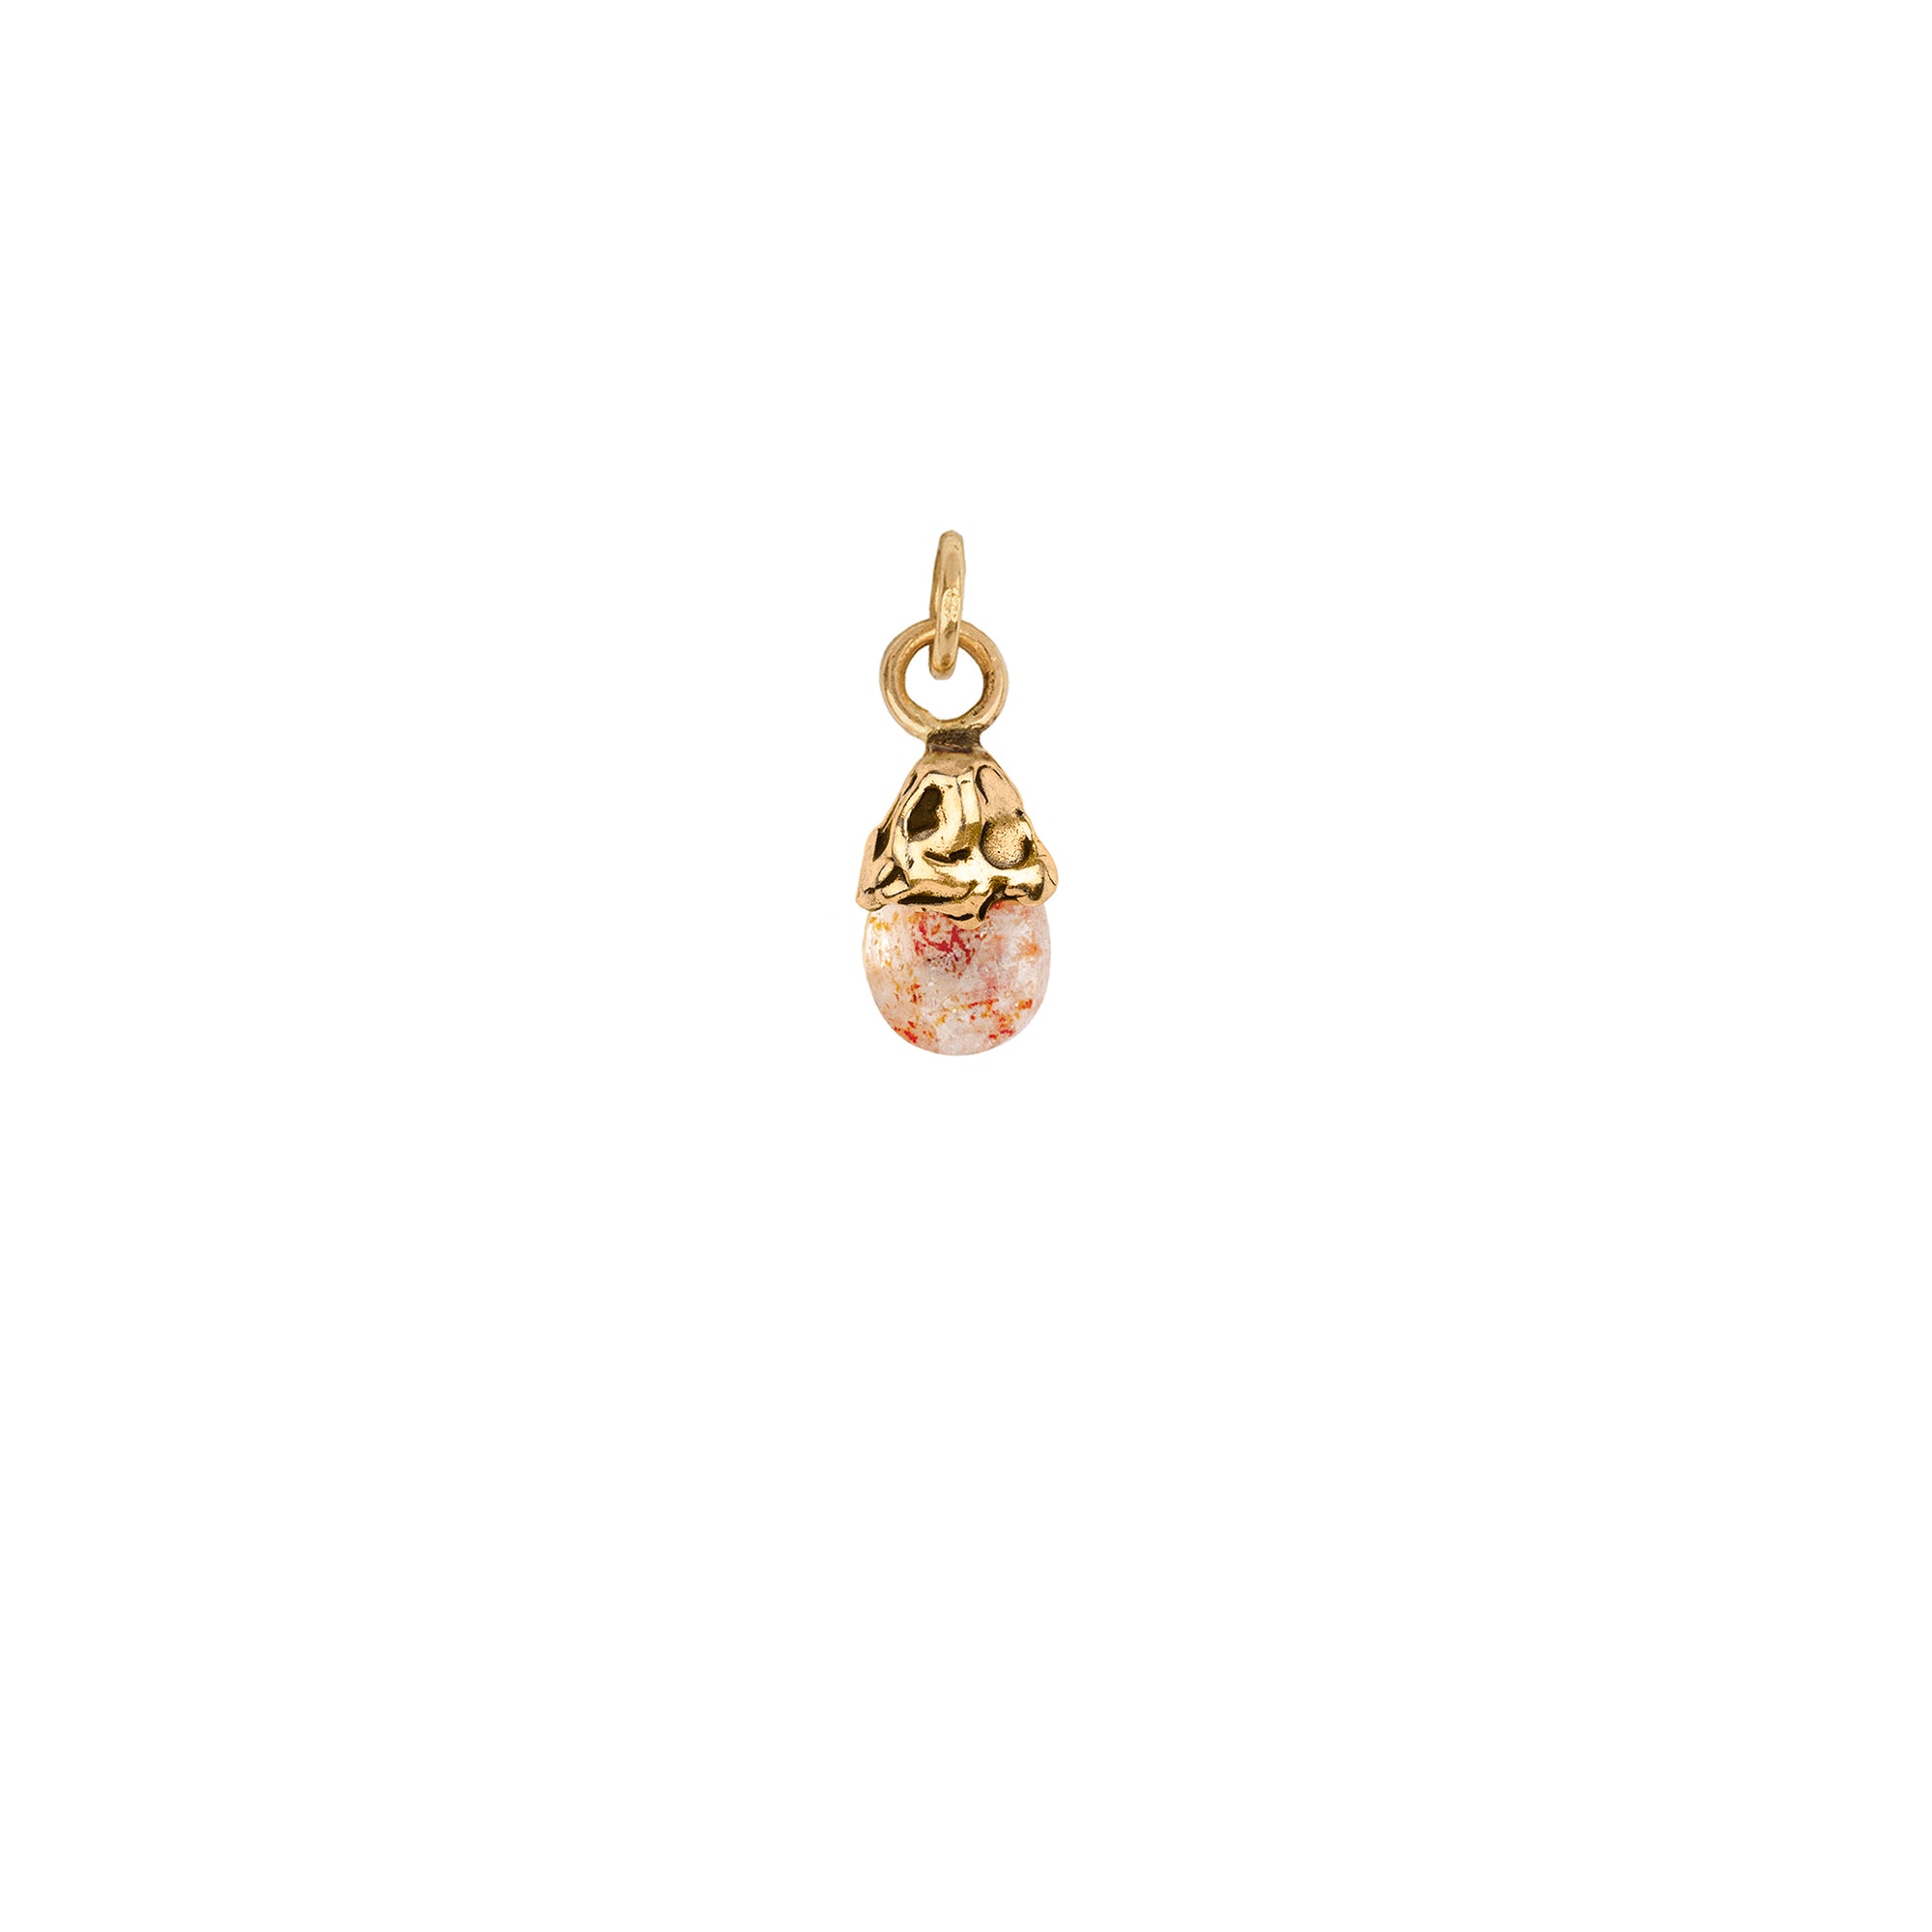 Strength 14K Gold Capped Attraction Charm